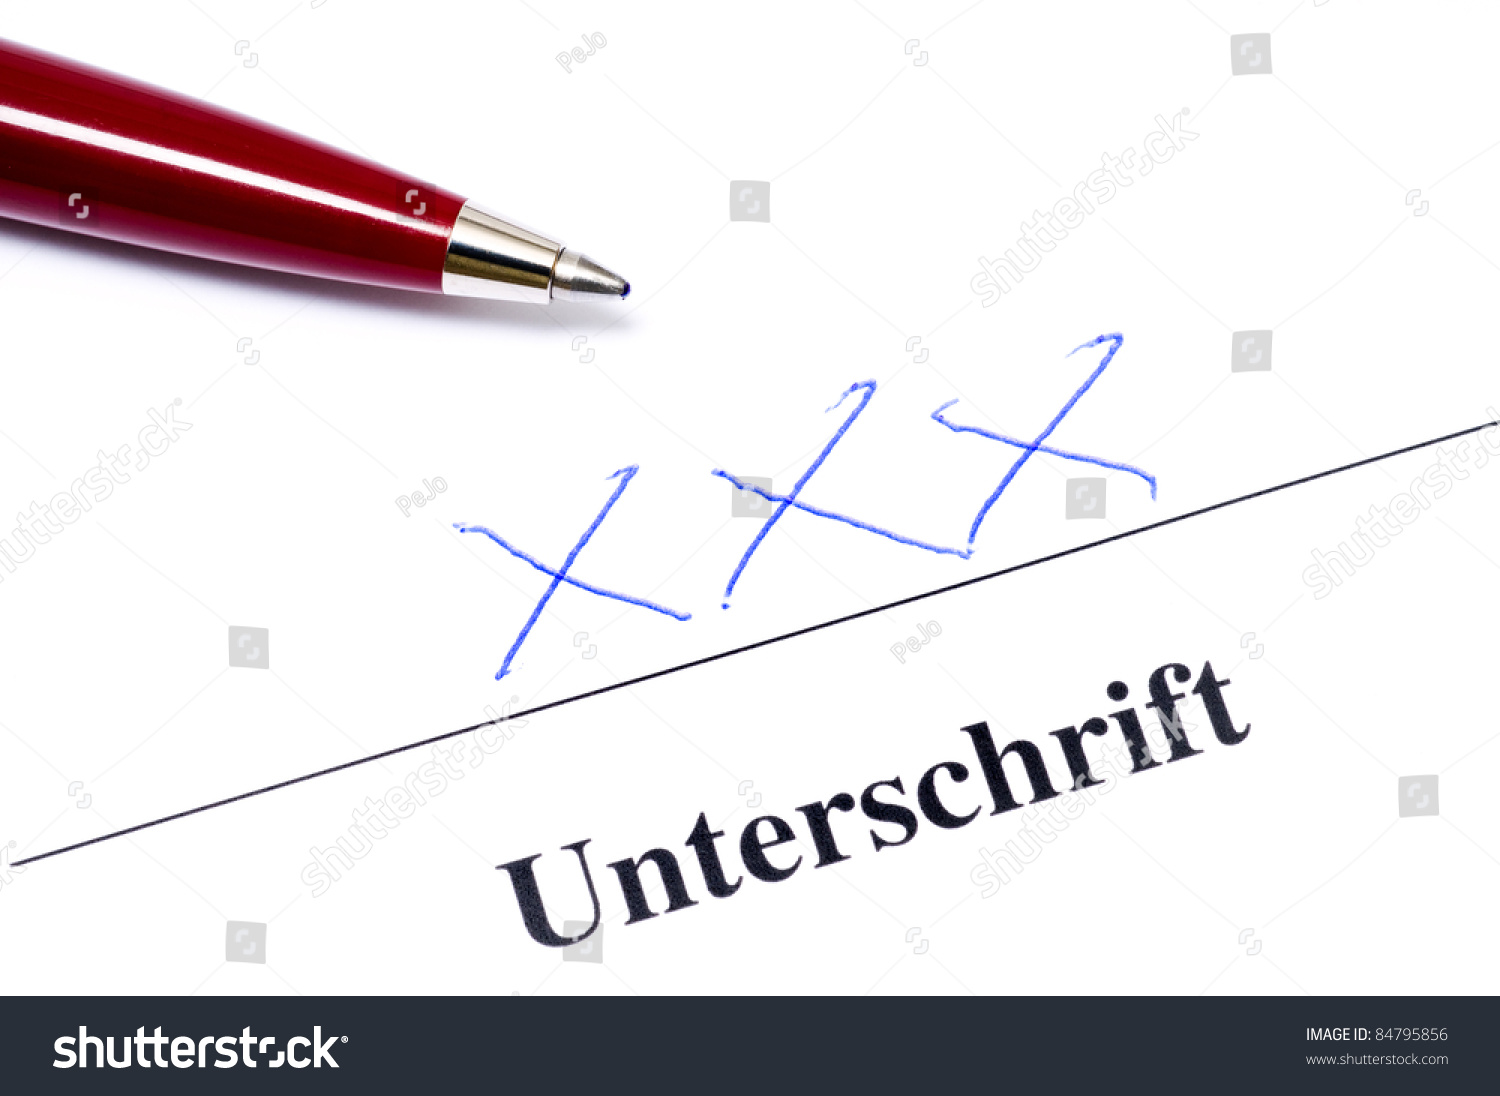 Three X On A Document With Ballpoint Pen, Unterschrift Means Signature ...